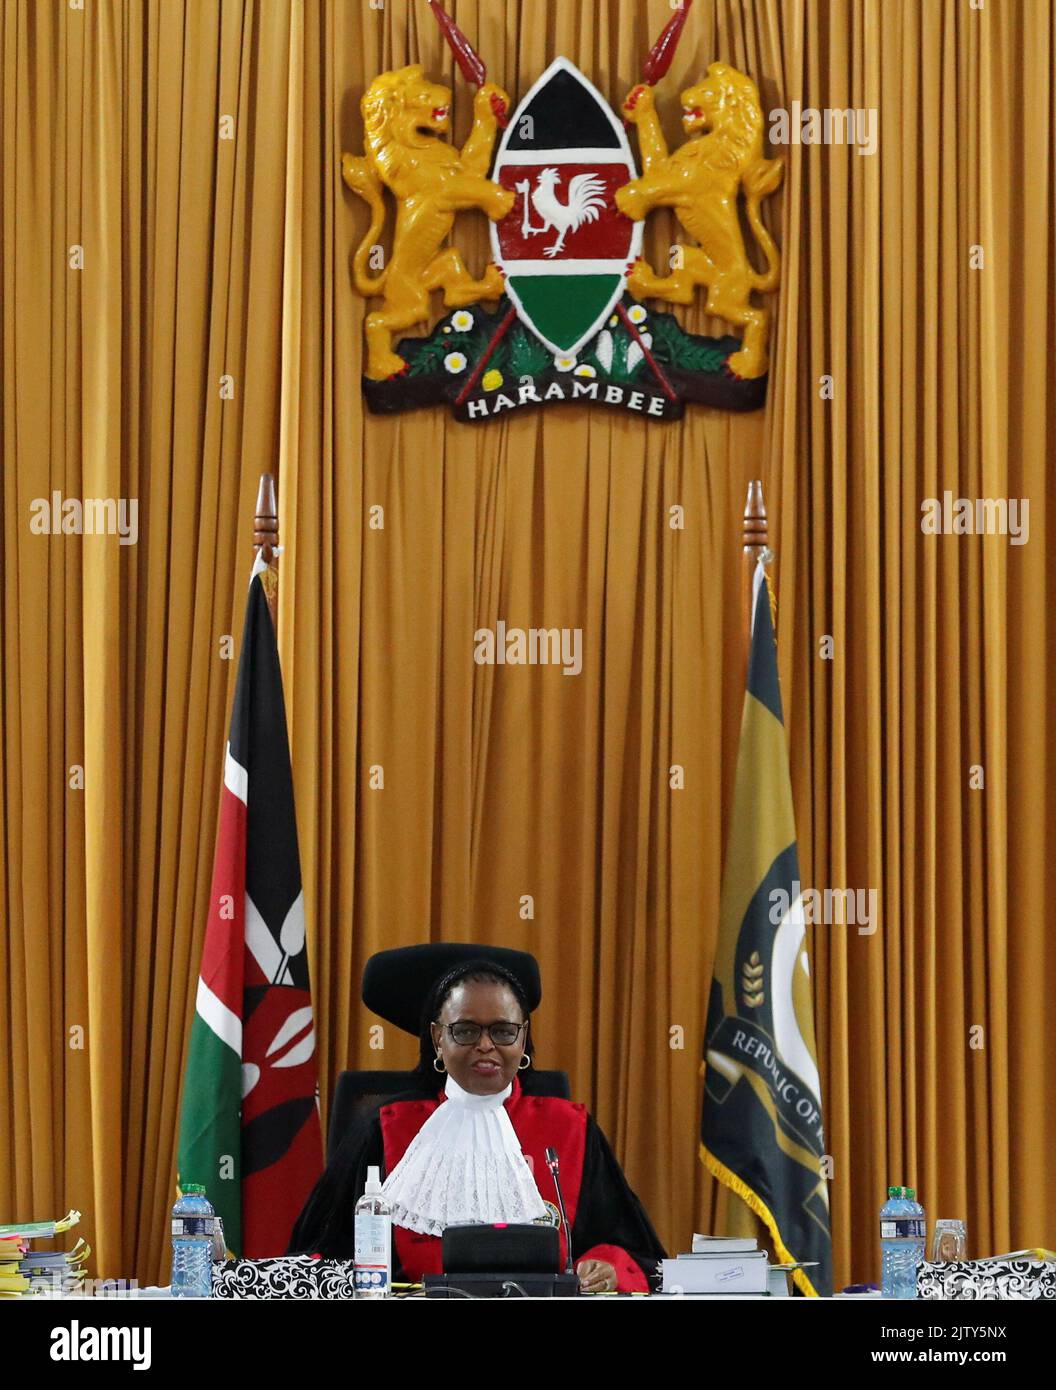 Kenya's Chief Justice Martha Koome attends the final hearing day over a petition seeking to invalidate the outcome of the recent presidential election, at the Supreme Court in Nairobi, Kenya September 2, 2022. REUTERS/Thomas Mukoya Stock Photo